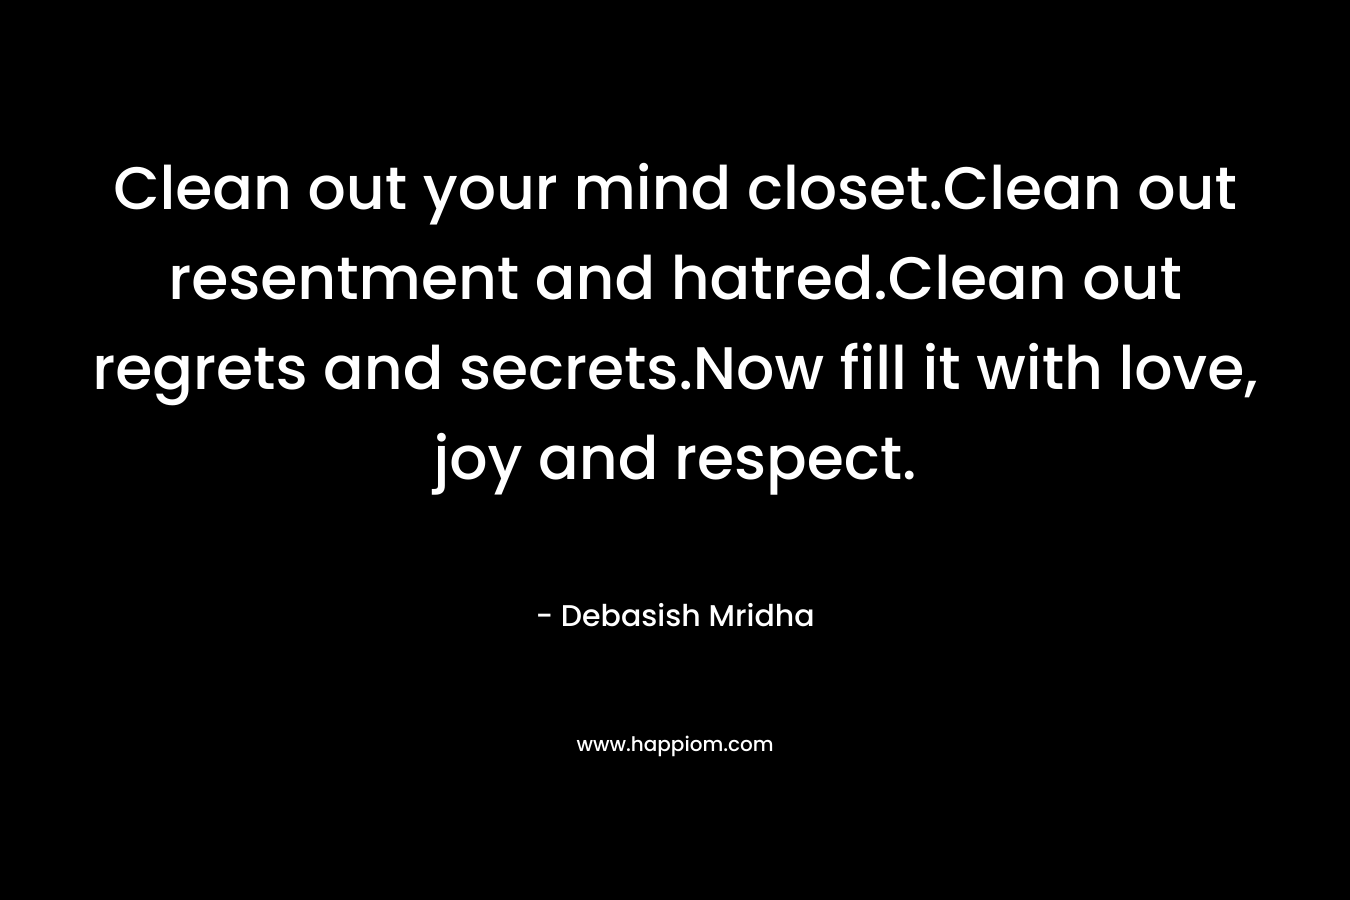 Clean out your mind closet.Clean out resentment and hatred.Clean out regrets and secrets.Now fill it with love, joy and respect.